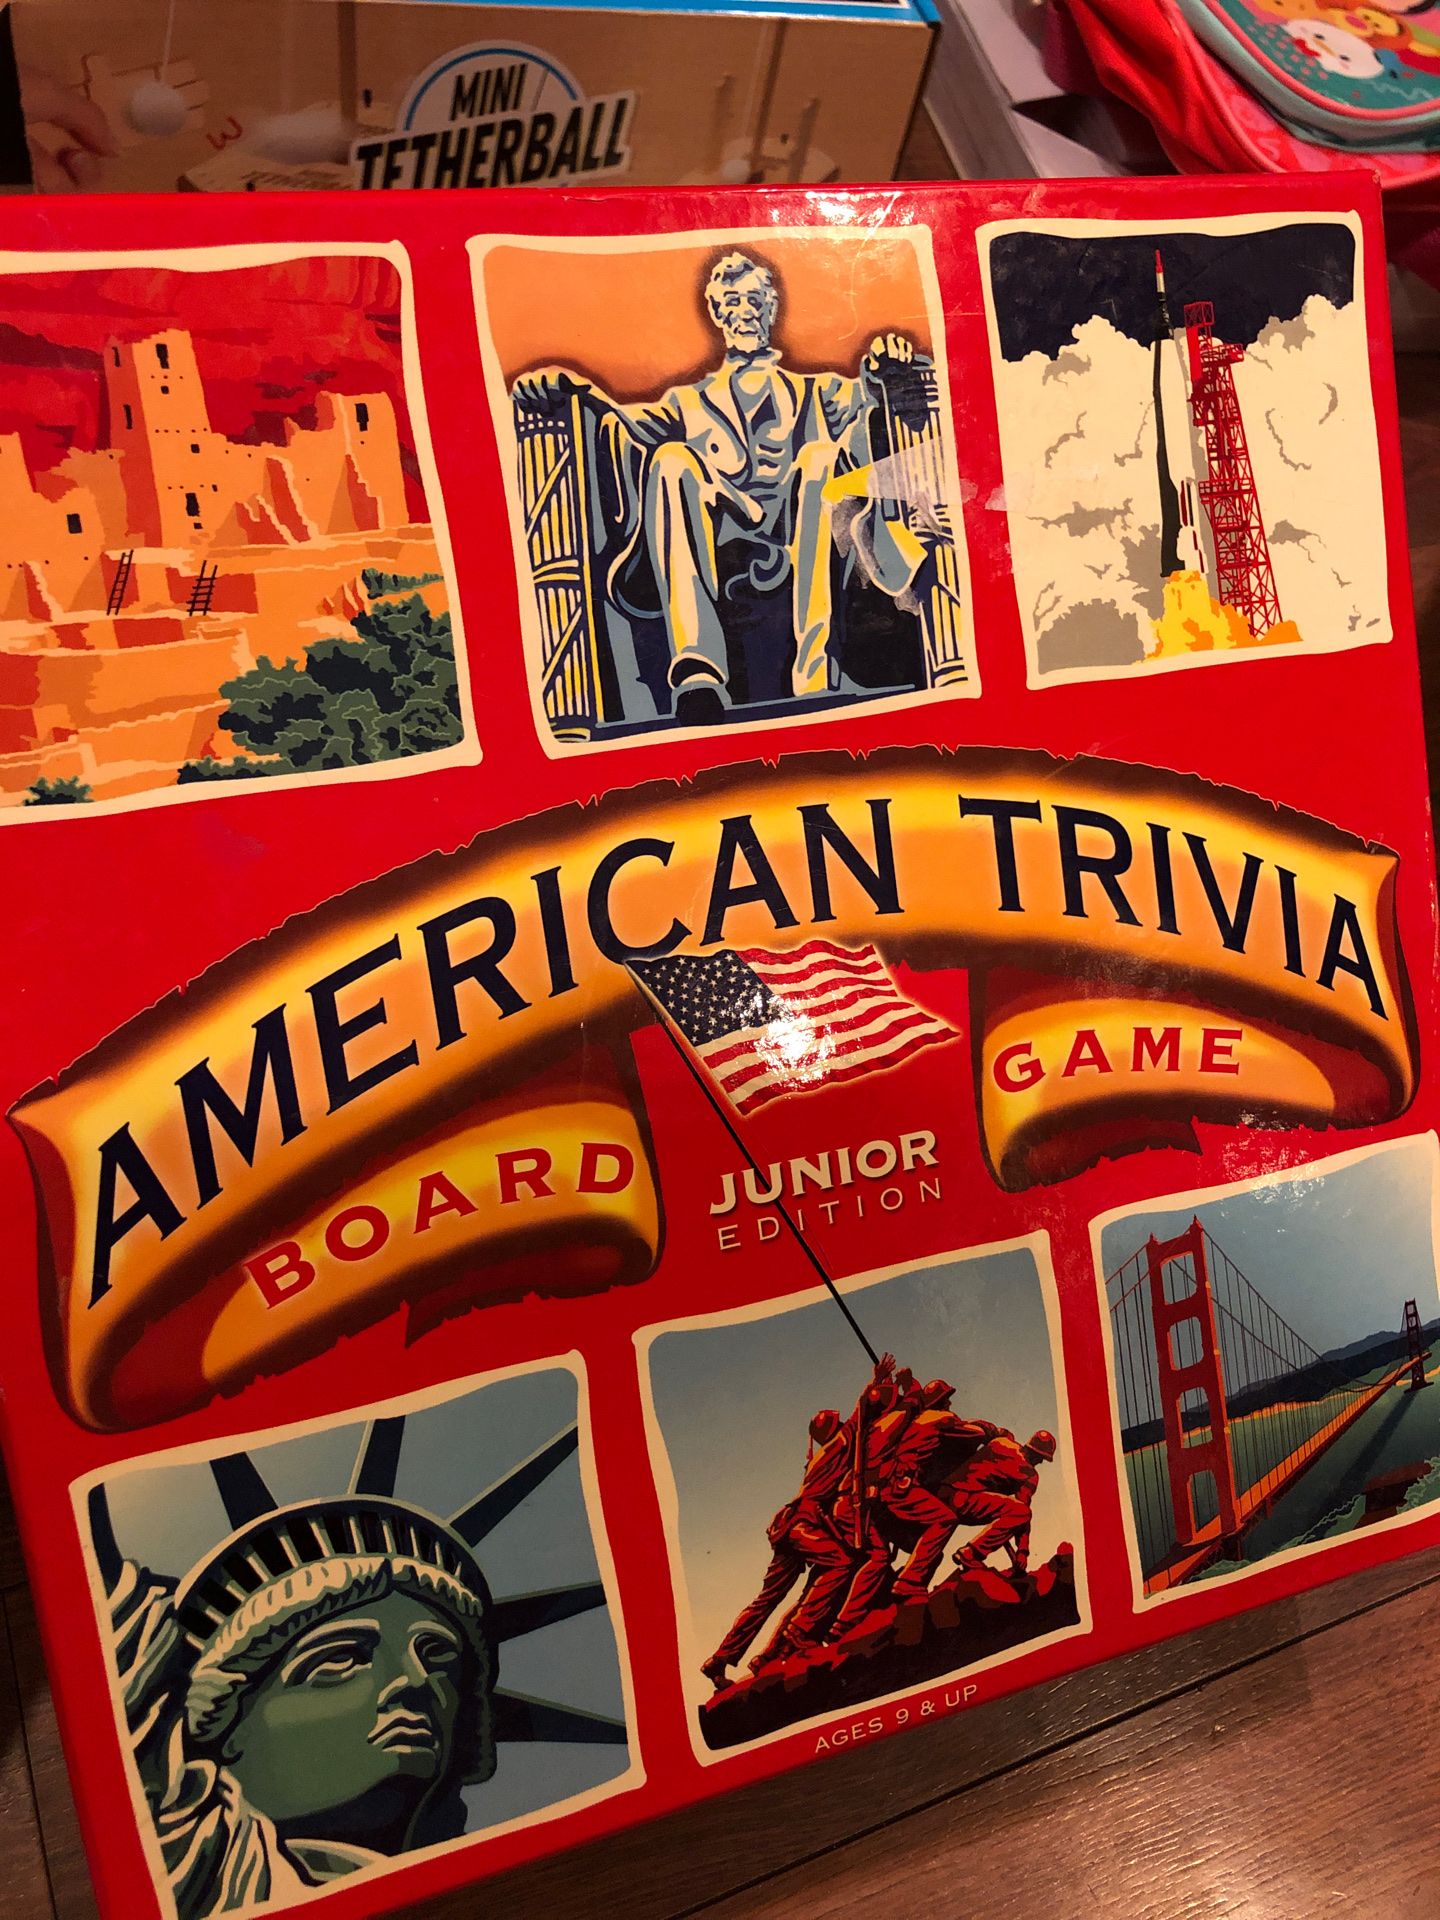 New American trivia board game Junior edition – ages nine and up - teach history, geography